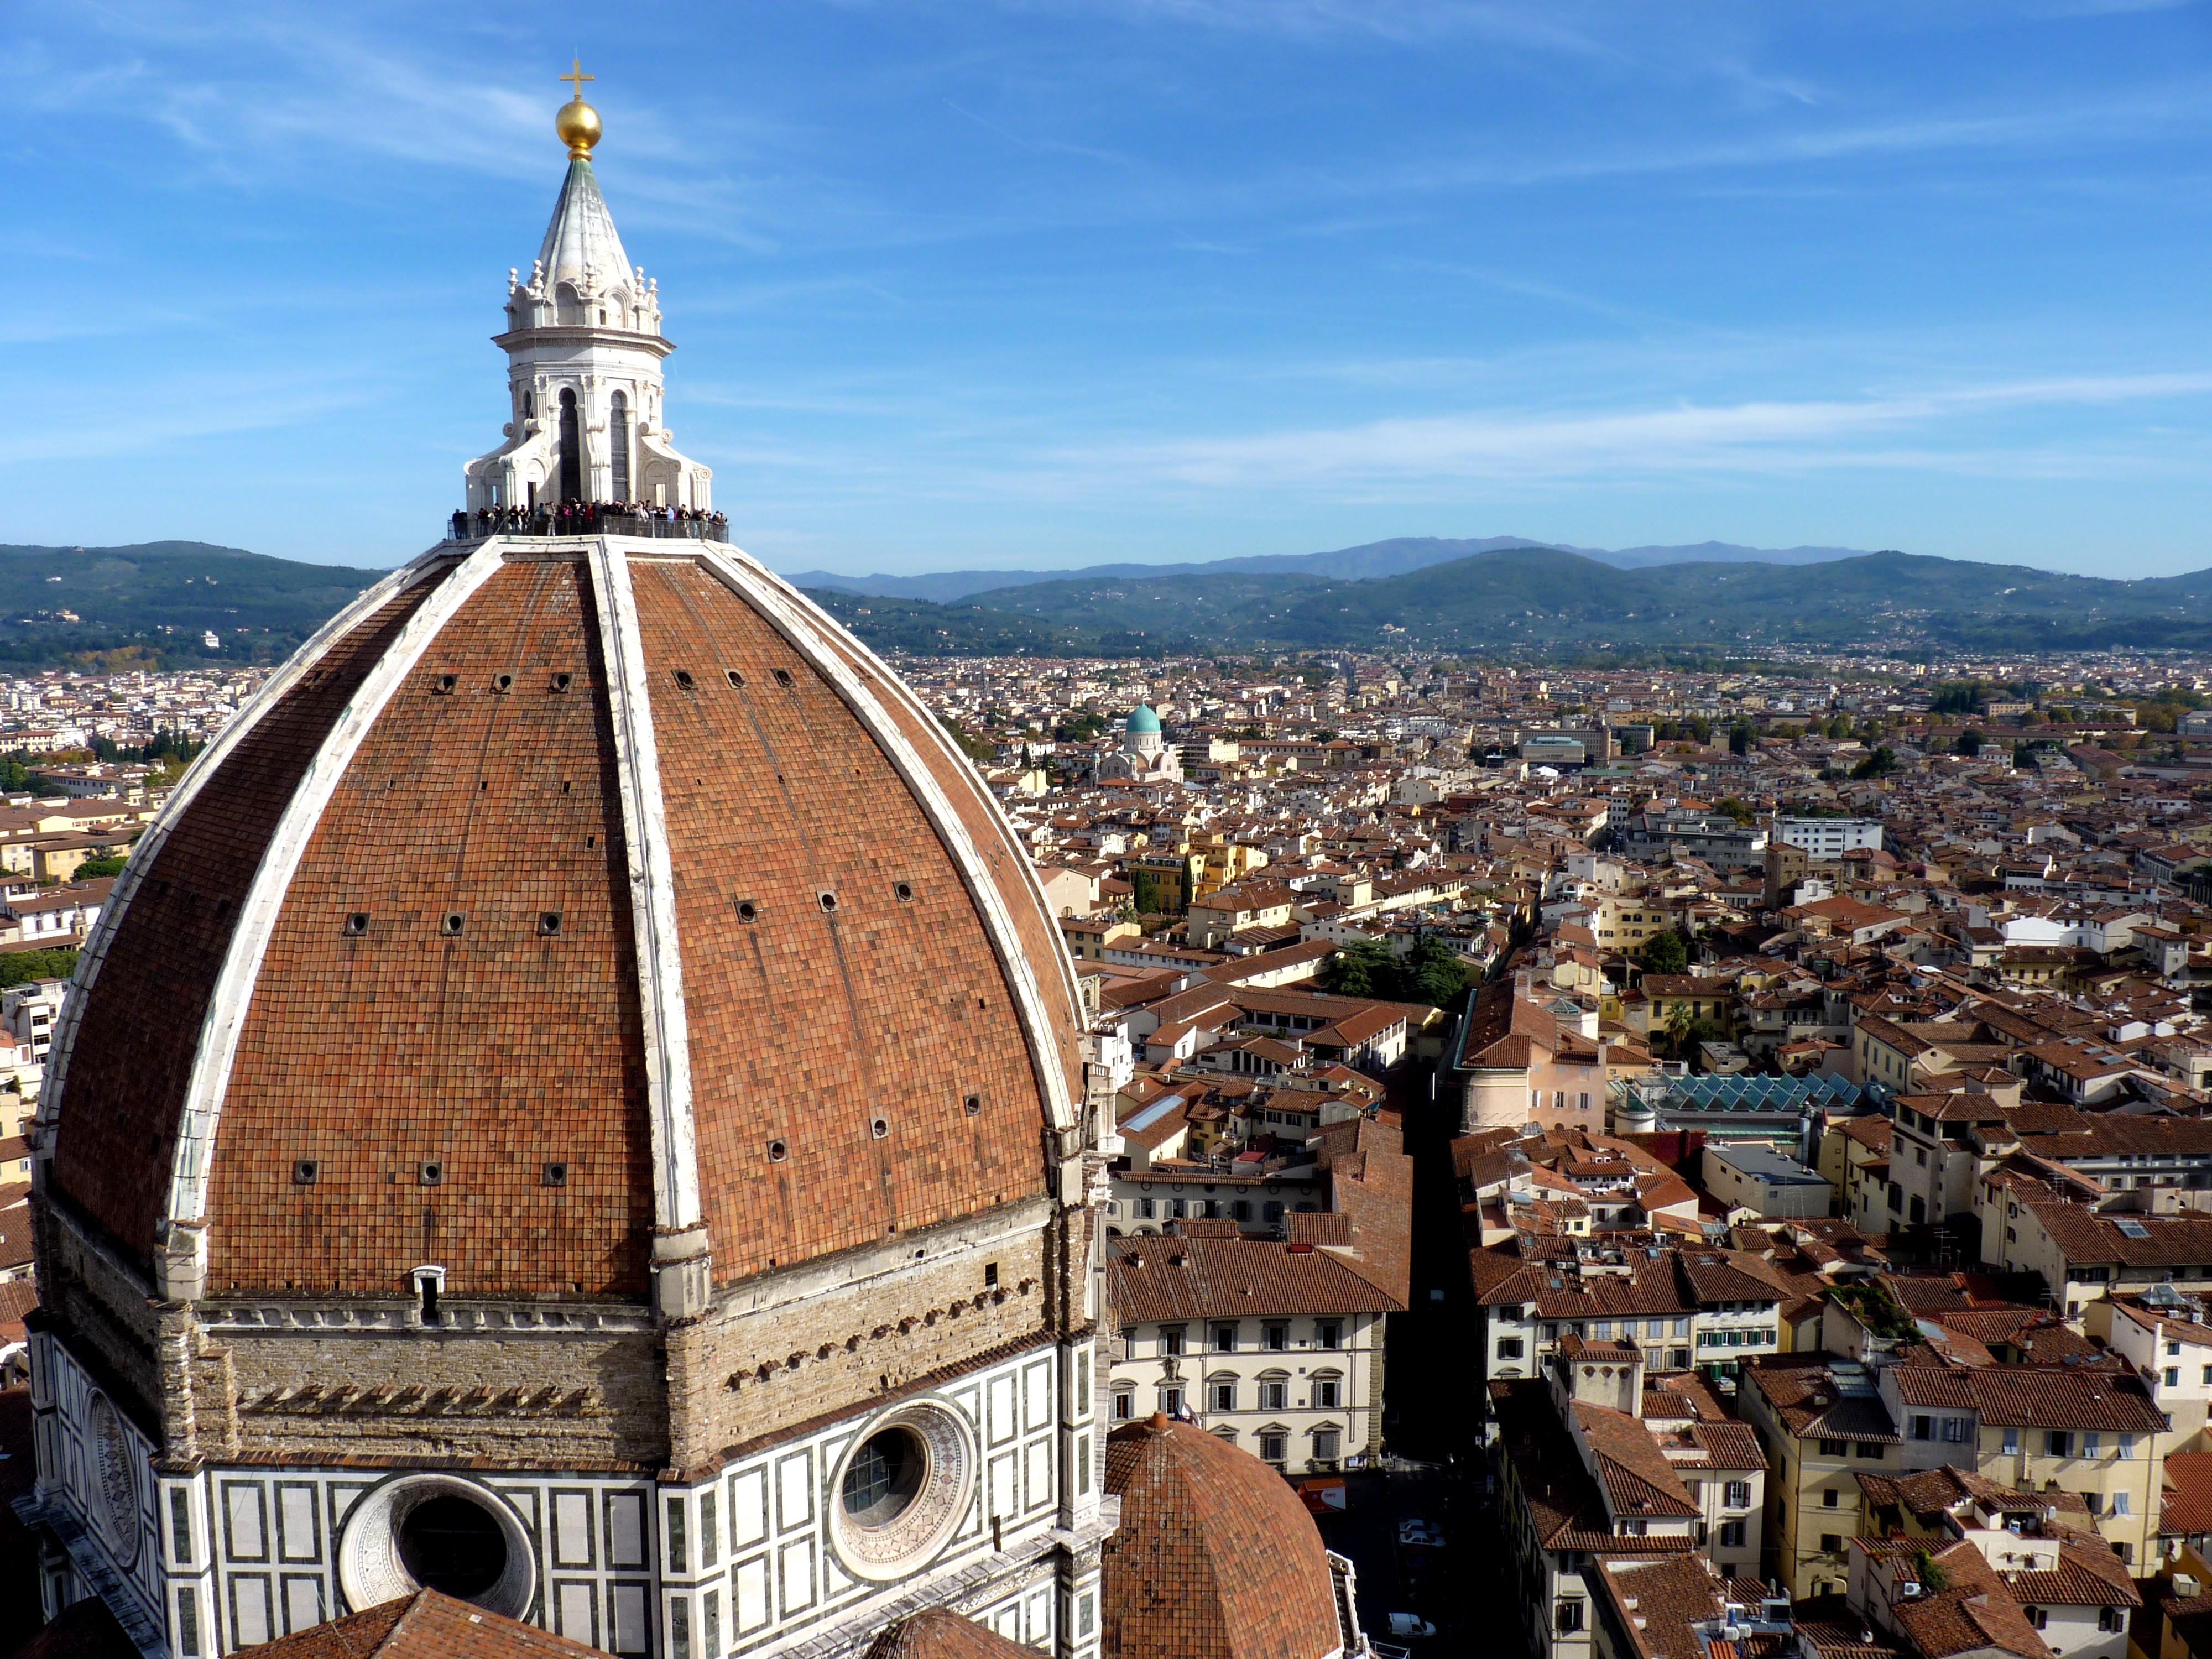 File:The dome of Florence Cathedral.jpg - Wikimedia Commons